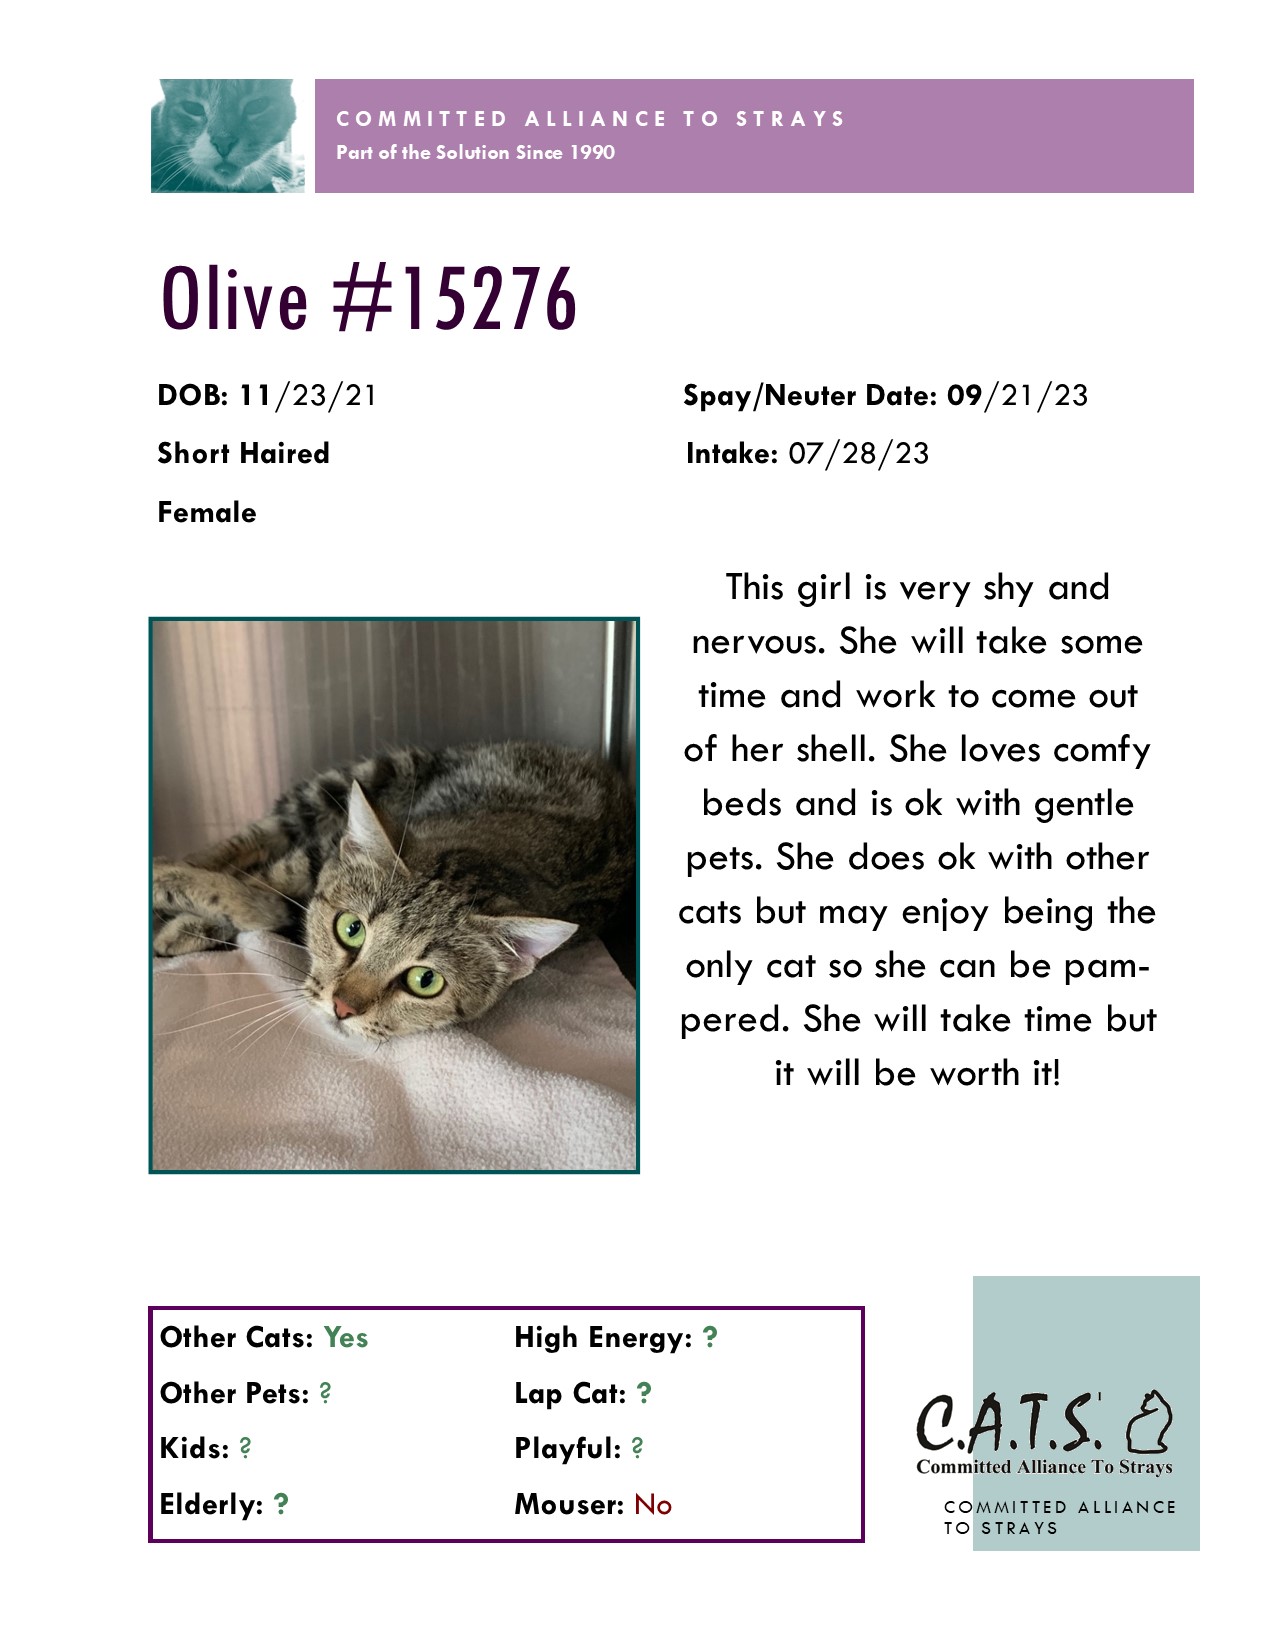 Meet Our Adoptable Cats!